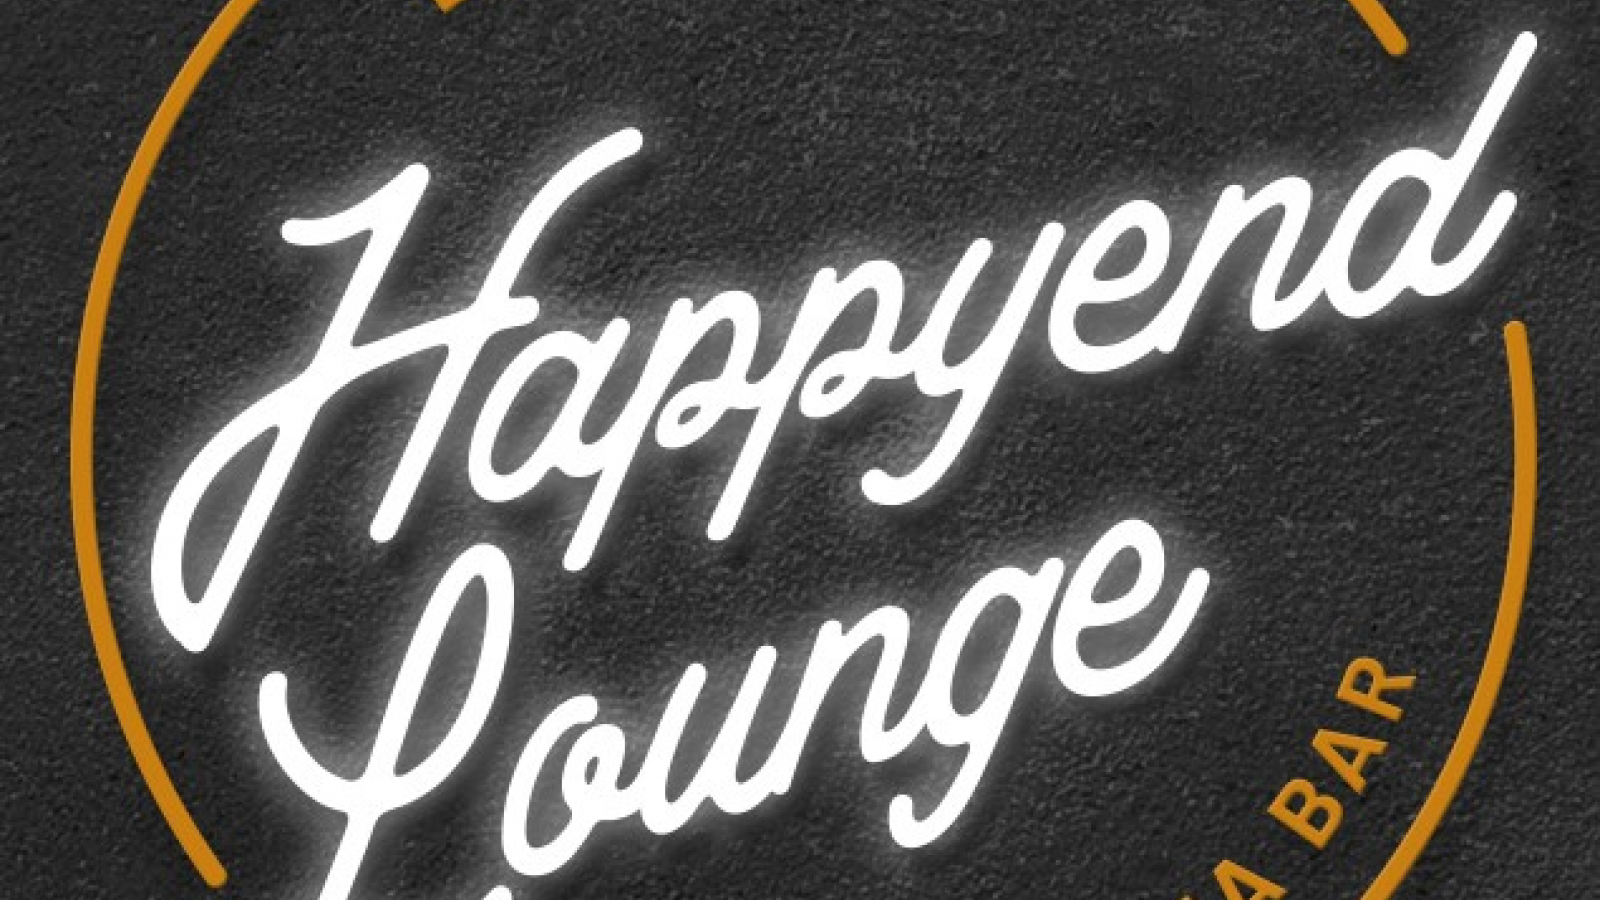 Happy end Lounge 